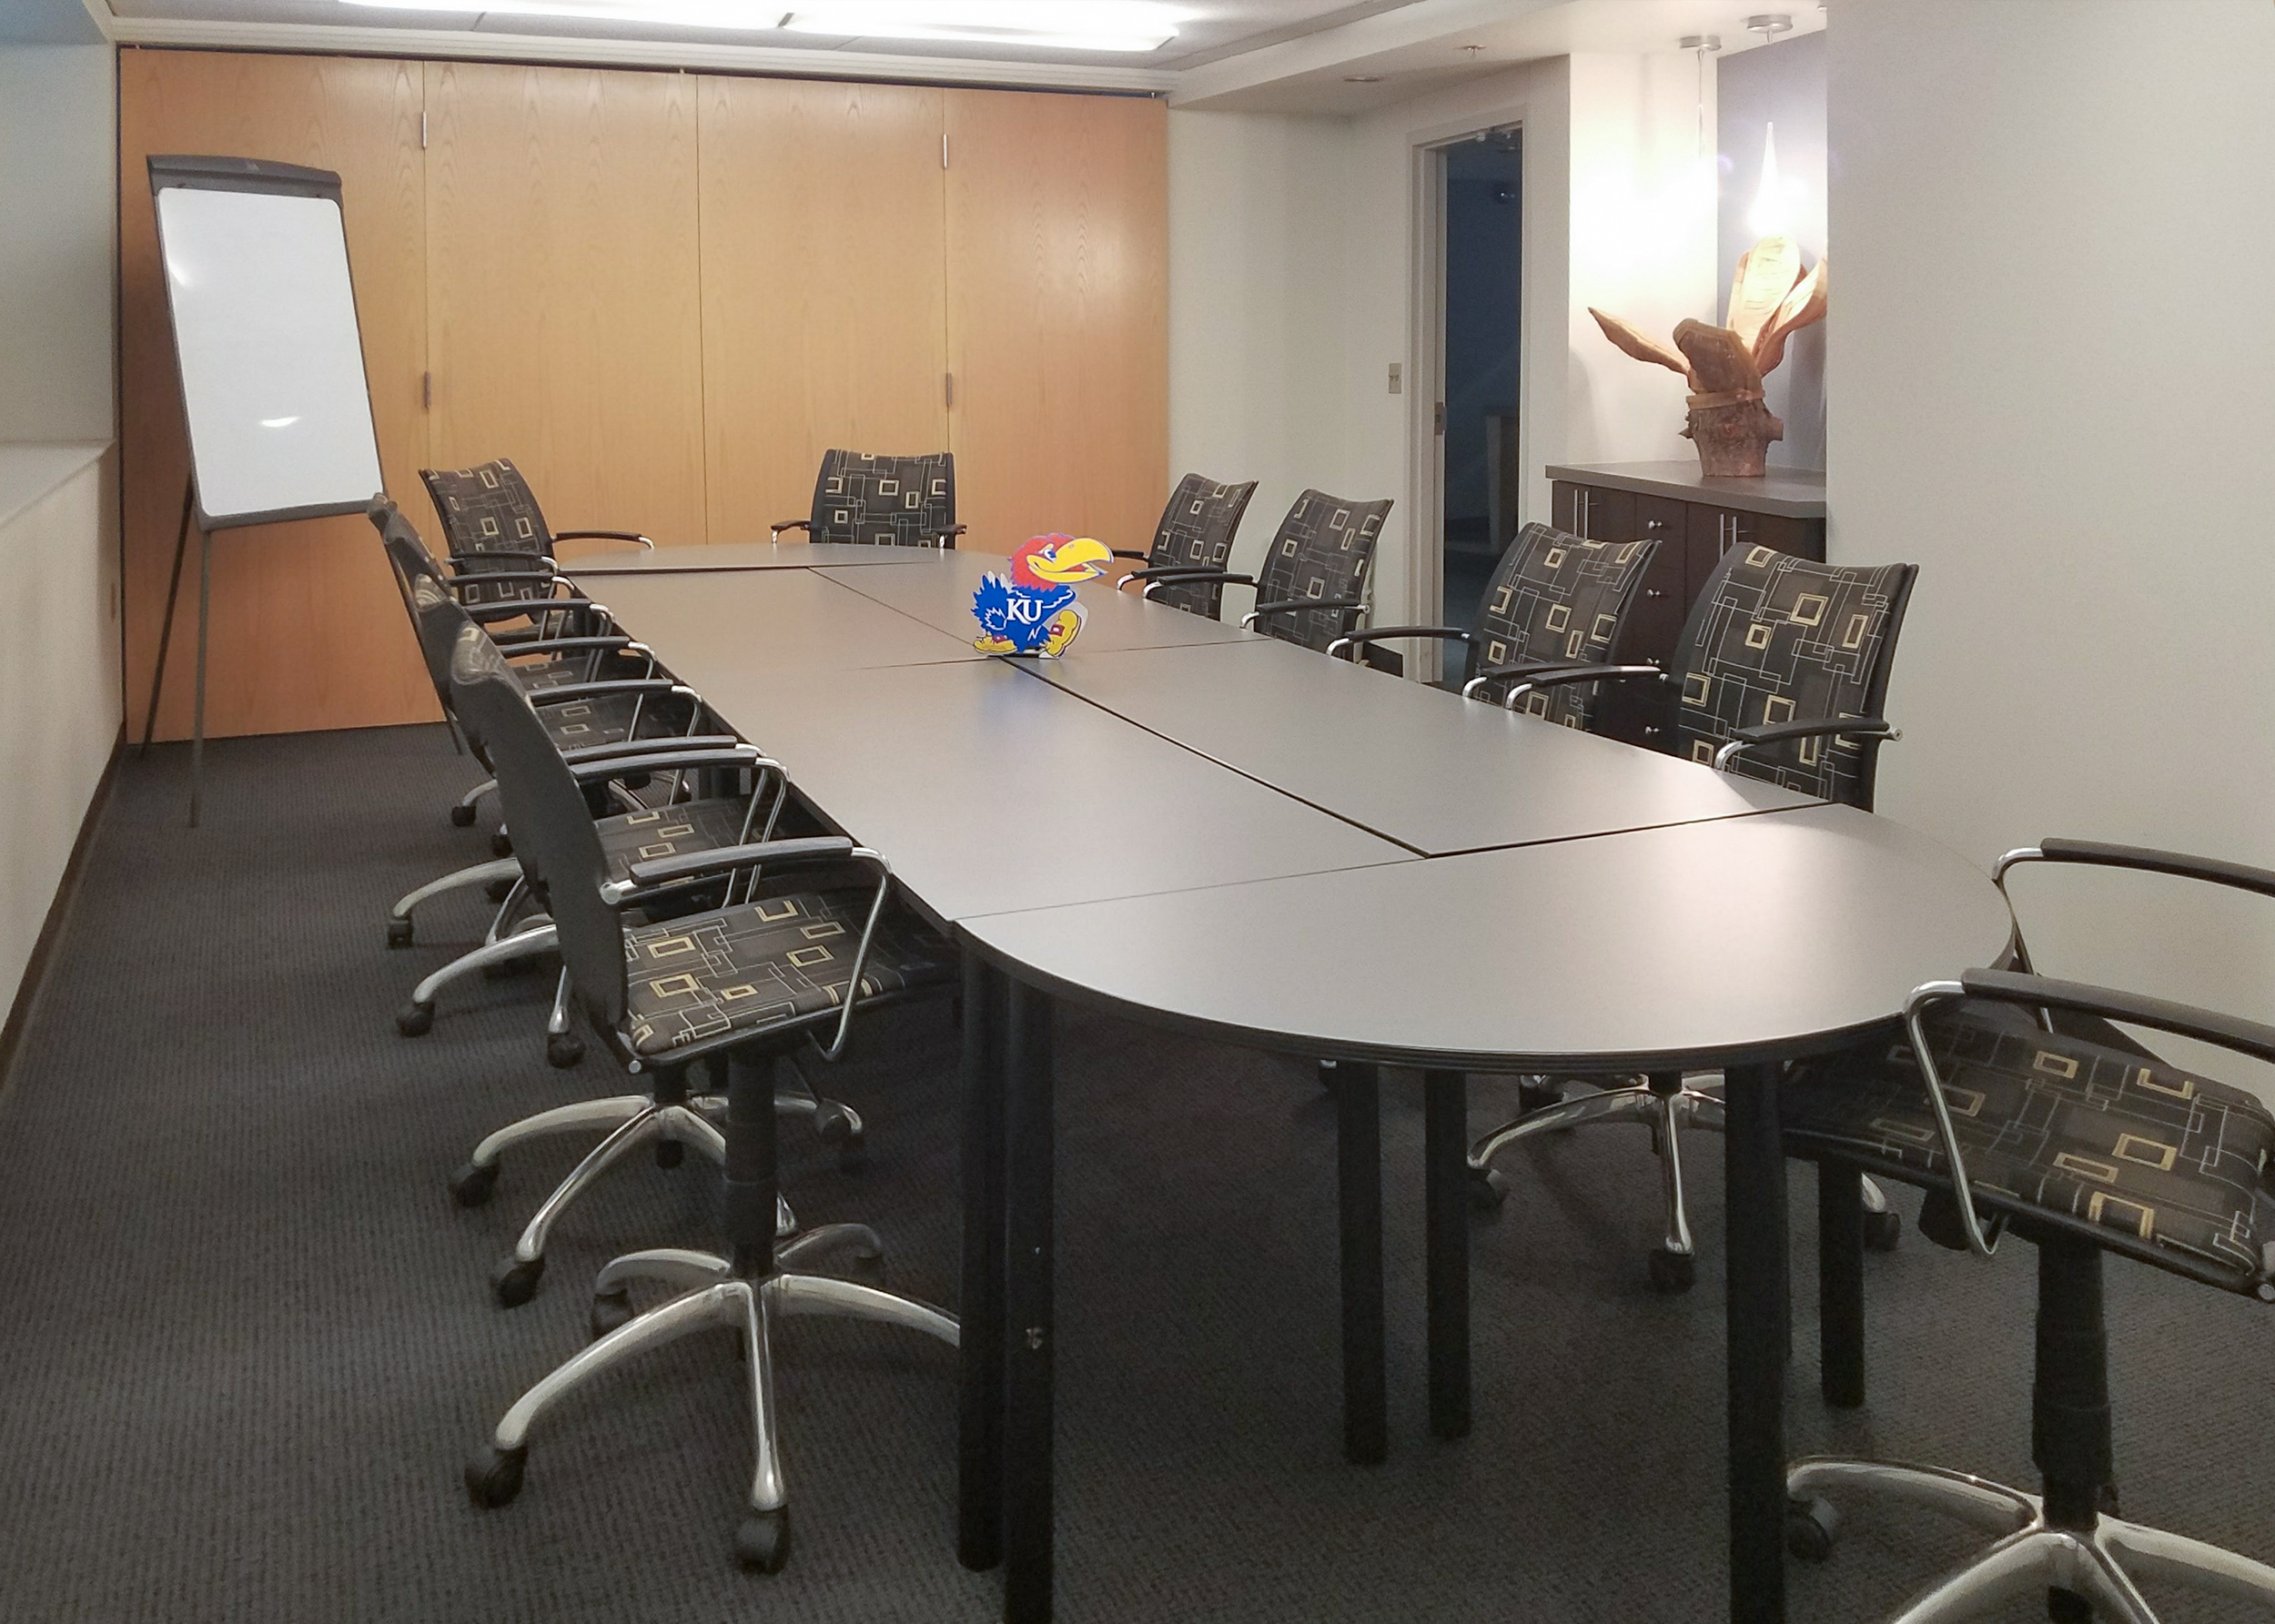 The Downs Meeting Room with a table surrounded by office chairs, and a whiteboard.